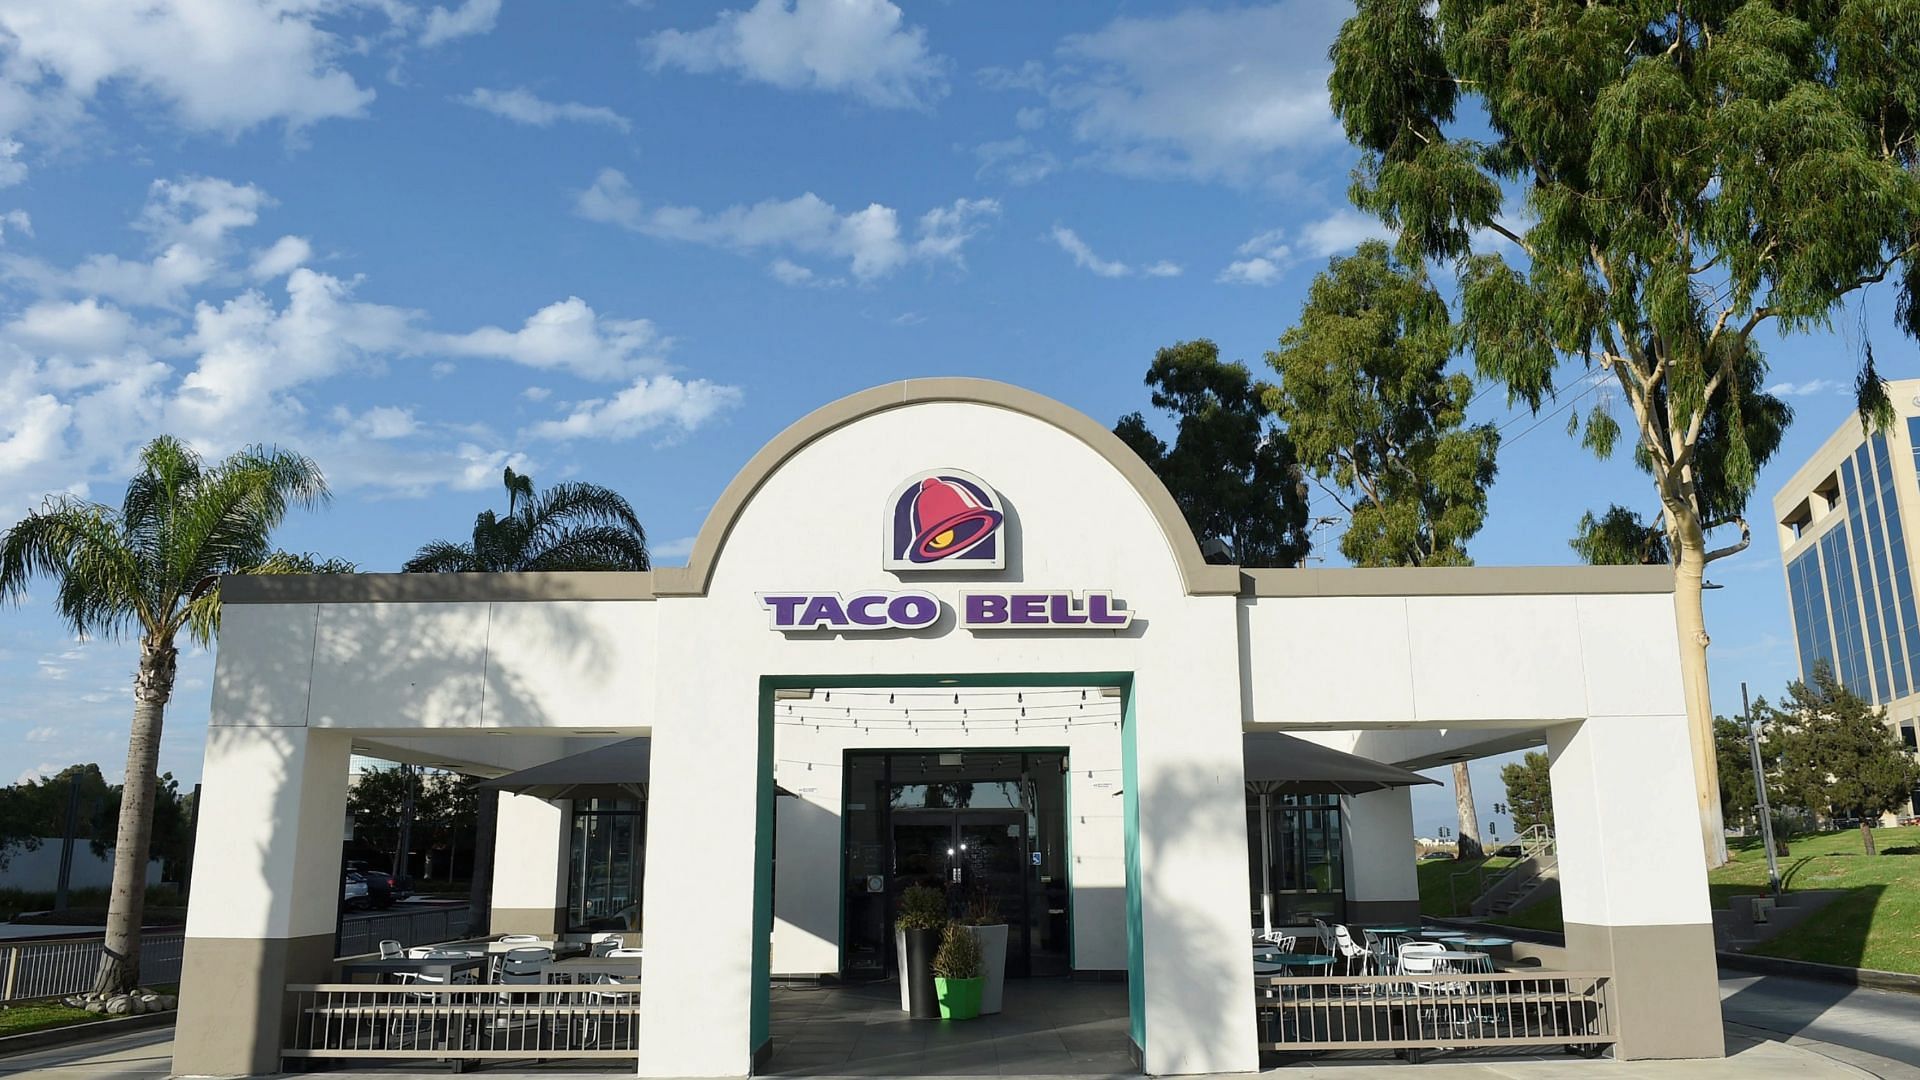 Taco Bell welcomes the year 2023 with amusing deals on its Mexican-American food (Image via Blanchard/Getty Images)